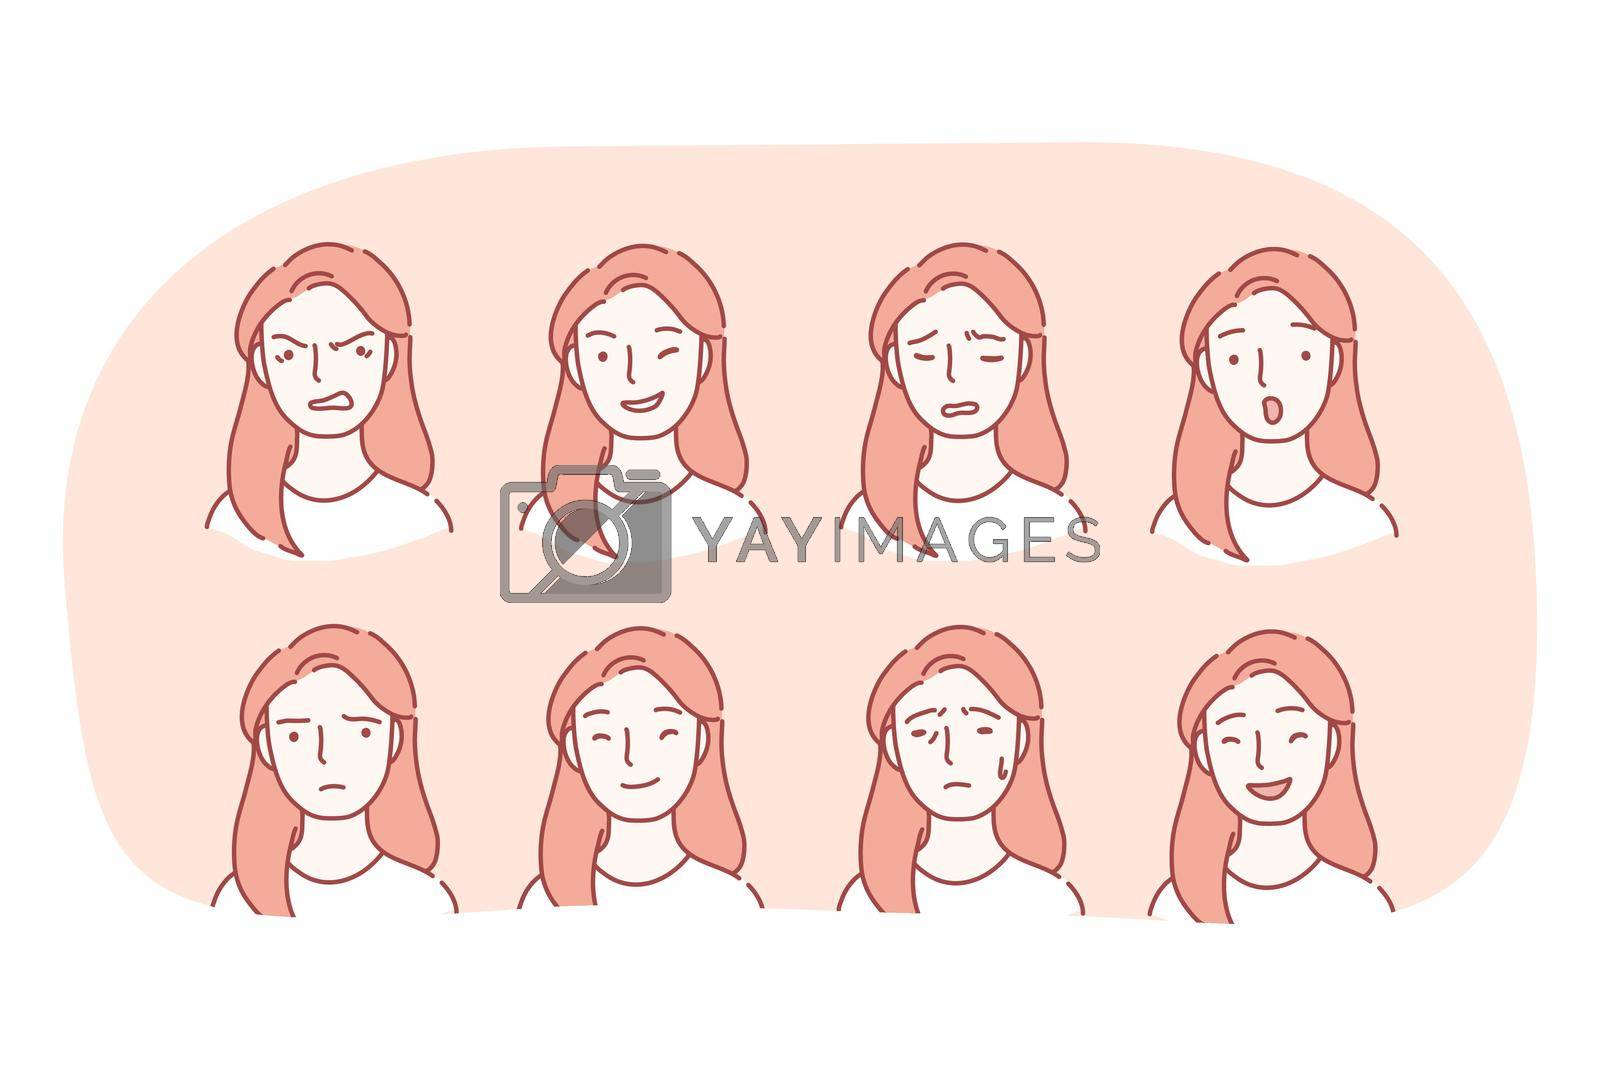 Royalty free image of Different emotions and variety of facial expressions concept by VECTORIUM